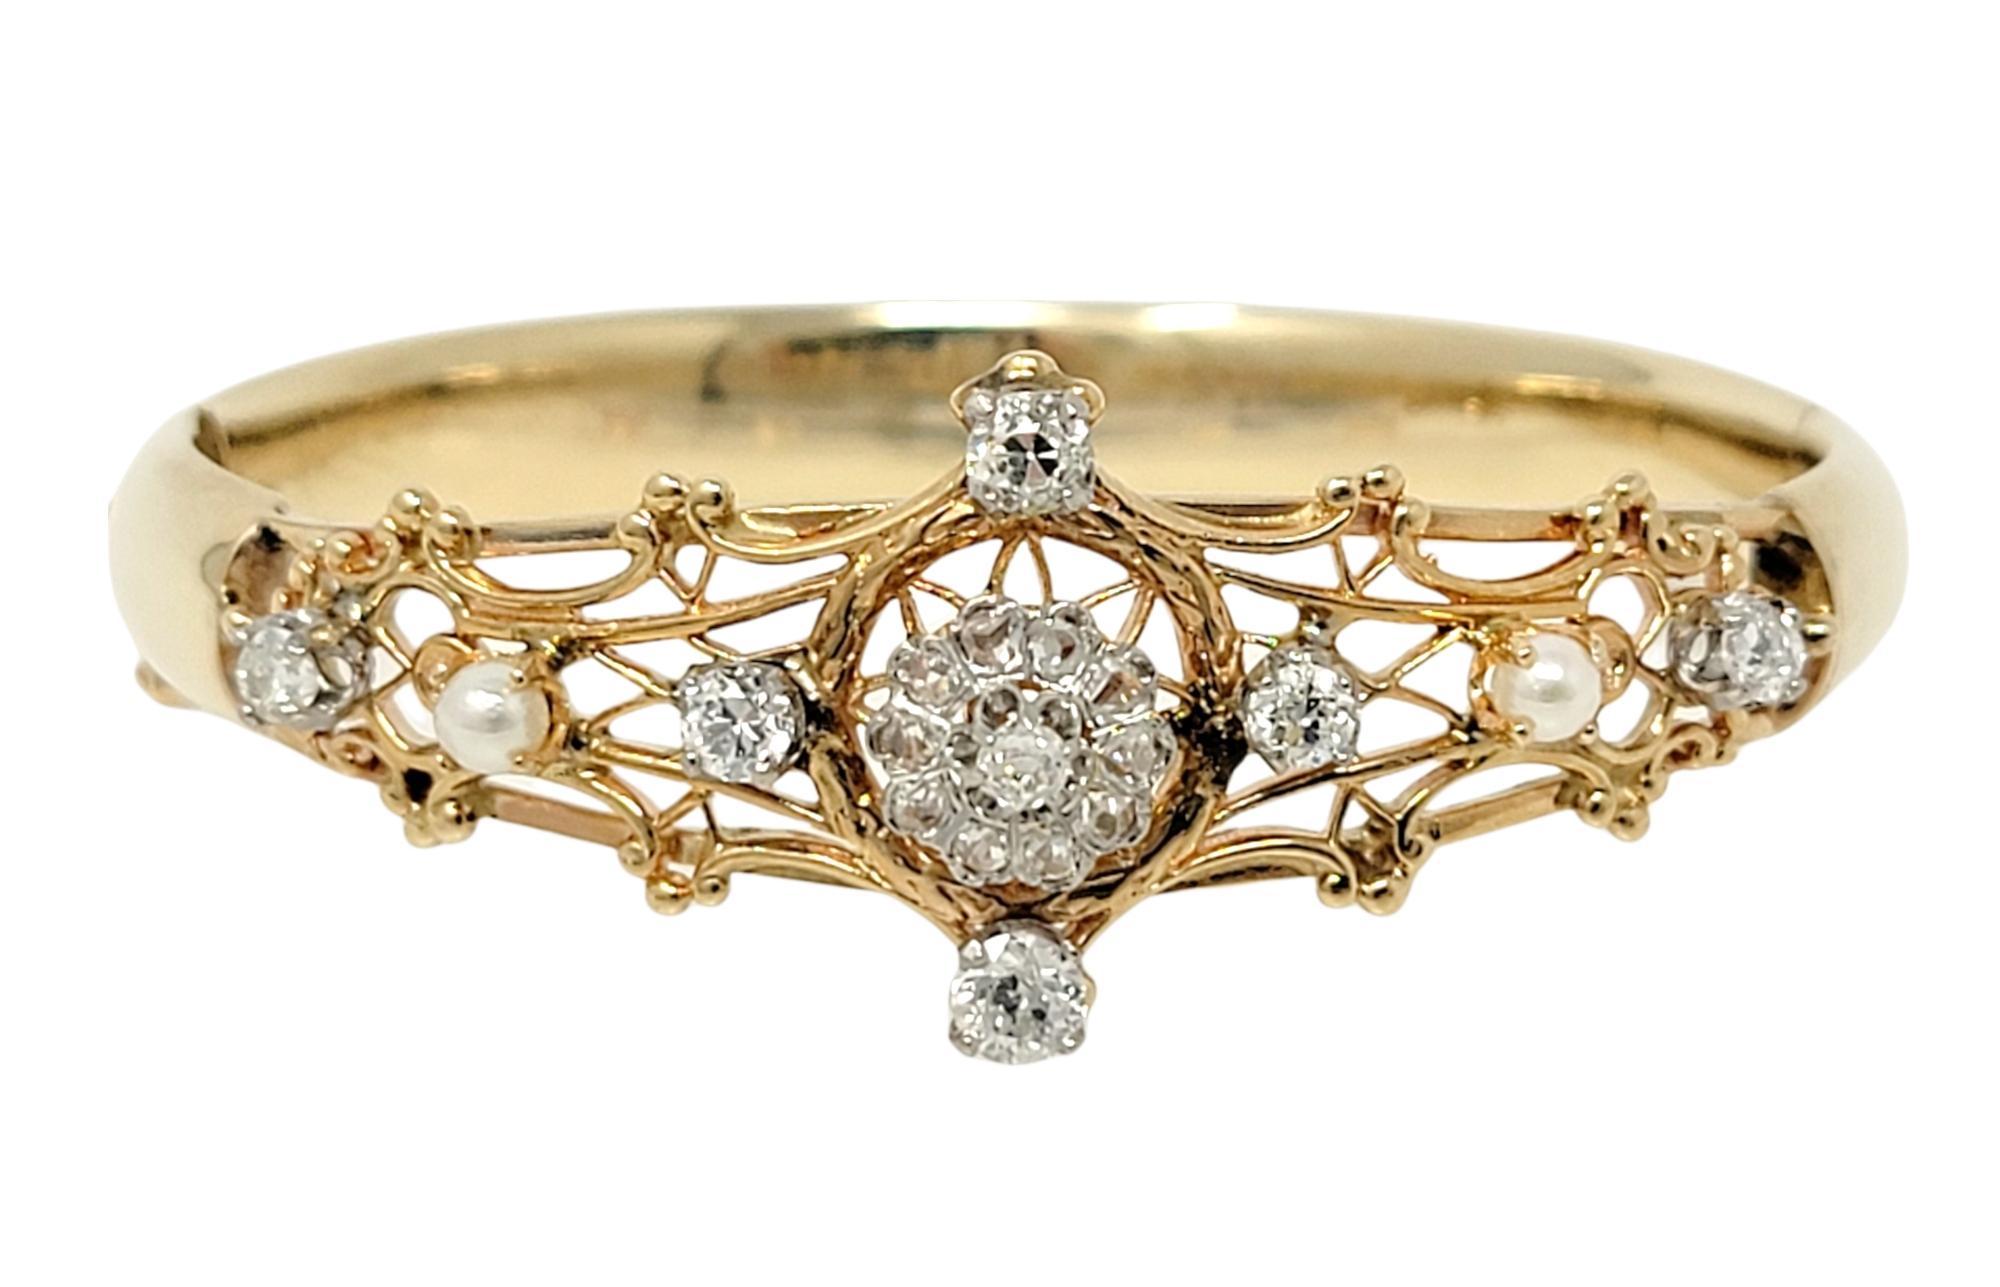 Enchanting antique bangle bracelet embellished with sparkling natural diamonds and seed pearls. This lovely piece is made of polished 14 karat yellow and rose gold and features a hinged side opening. The top half of the bracelet has an intricate